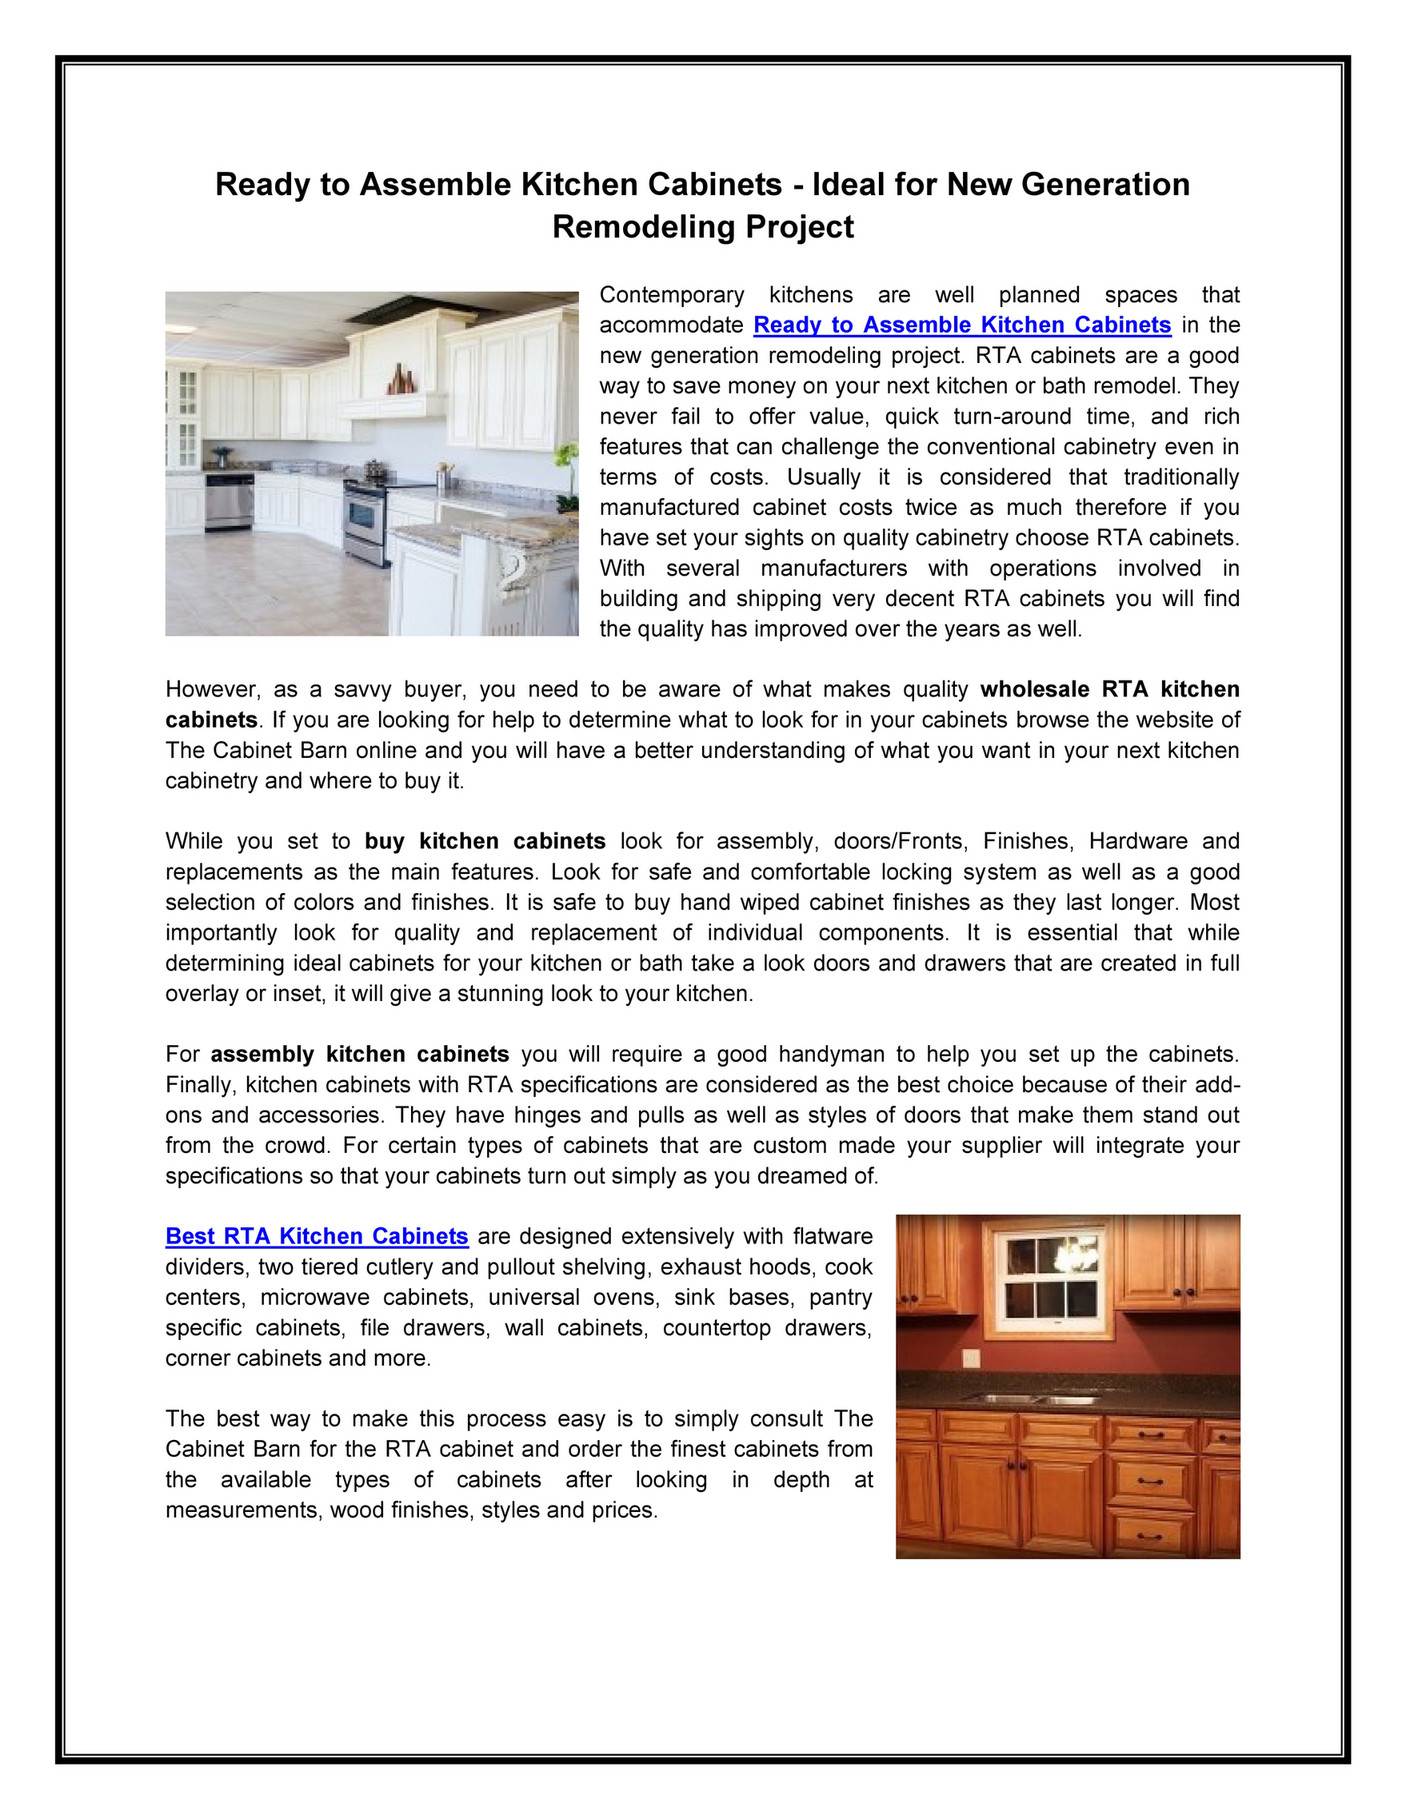 The Cabinet Barn - Best RTA Kitchen Cabinets - Page 1 - Created with